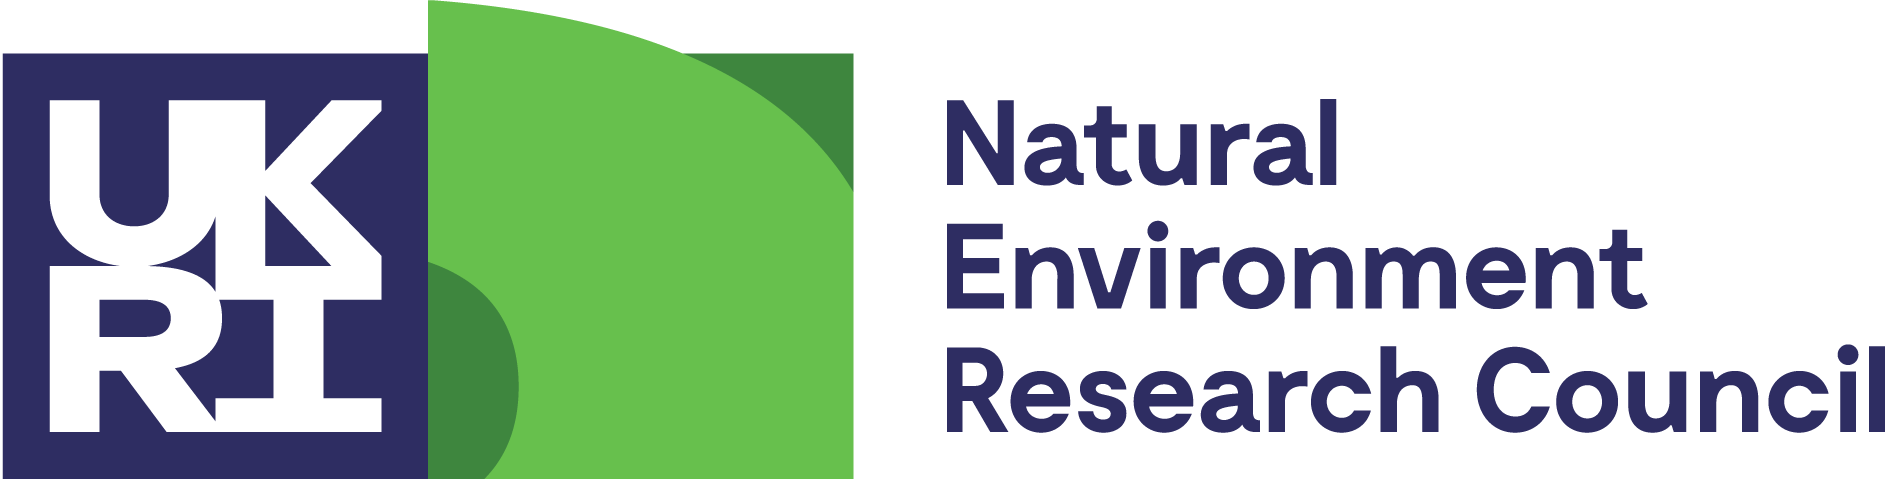 UKRI UK Research and Innovation with Natural Environment Research Council logo